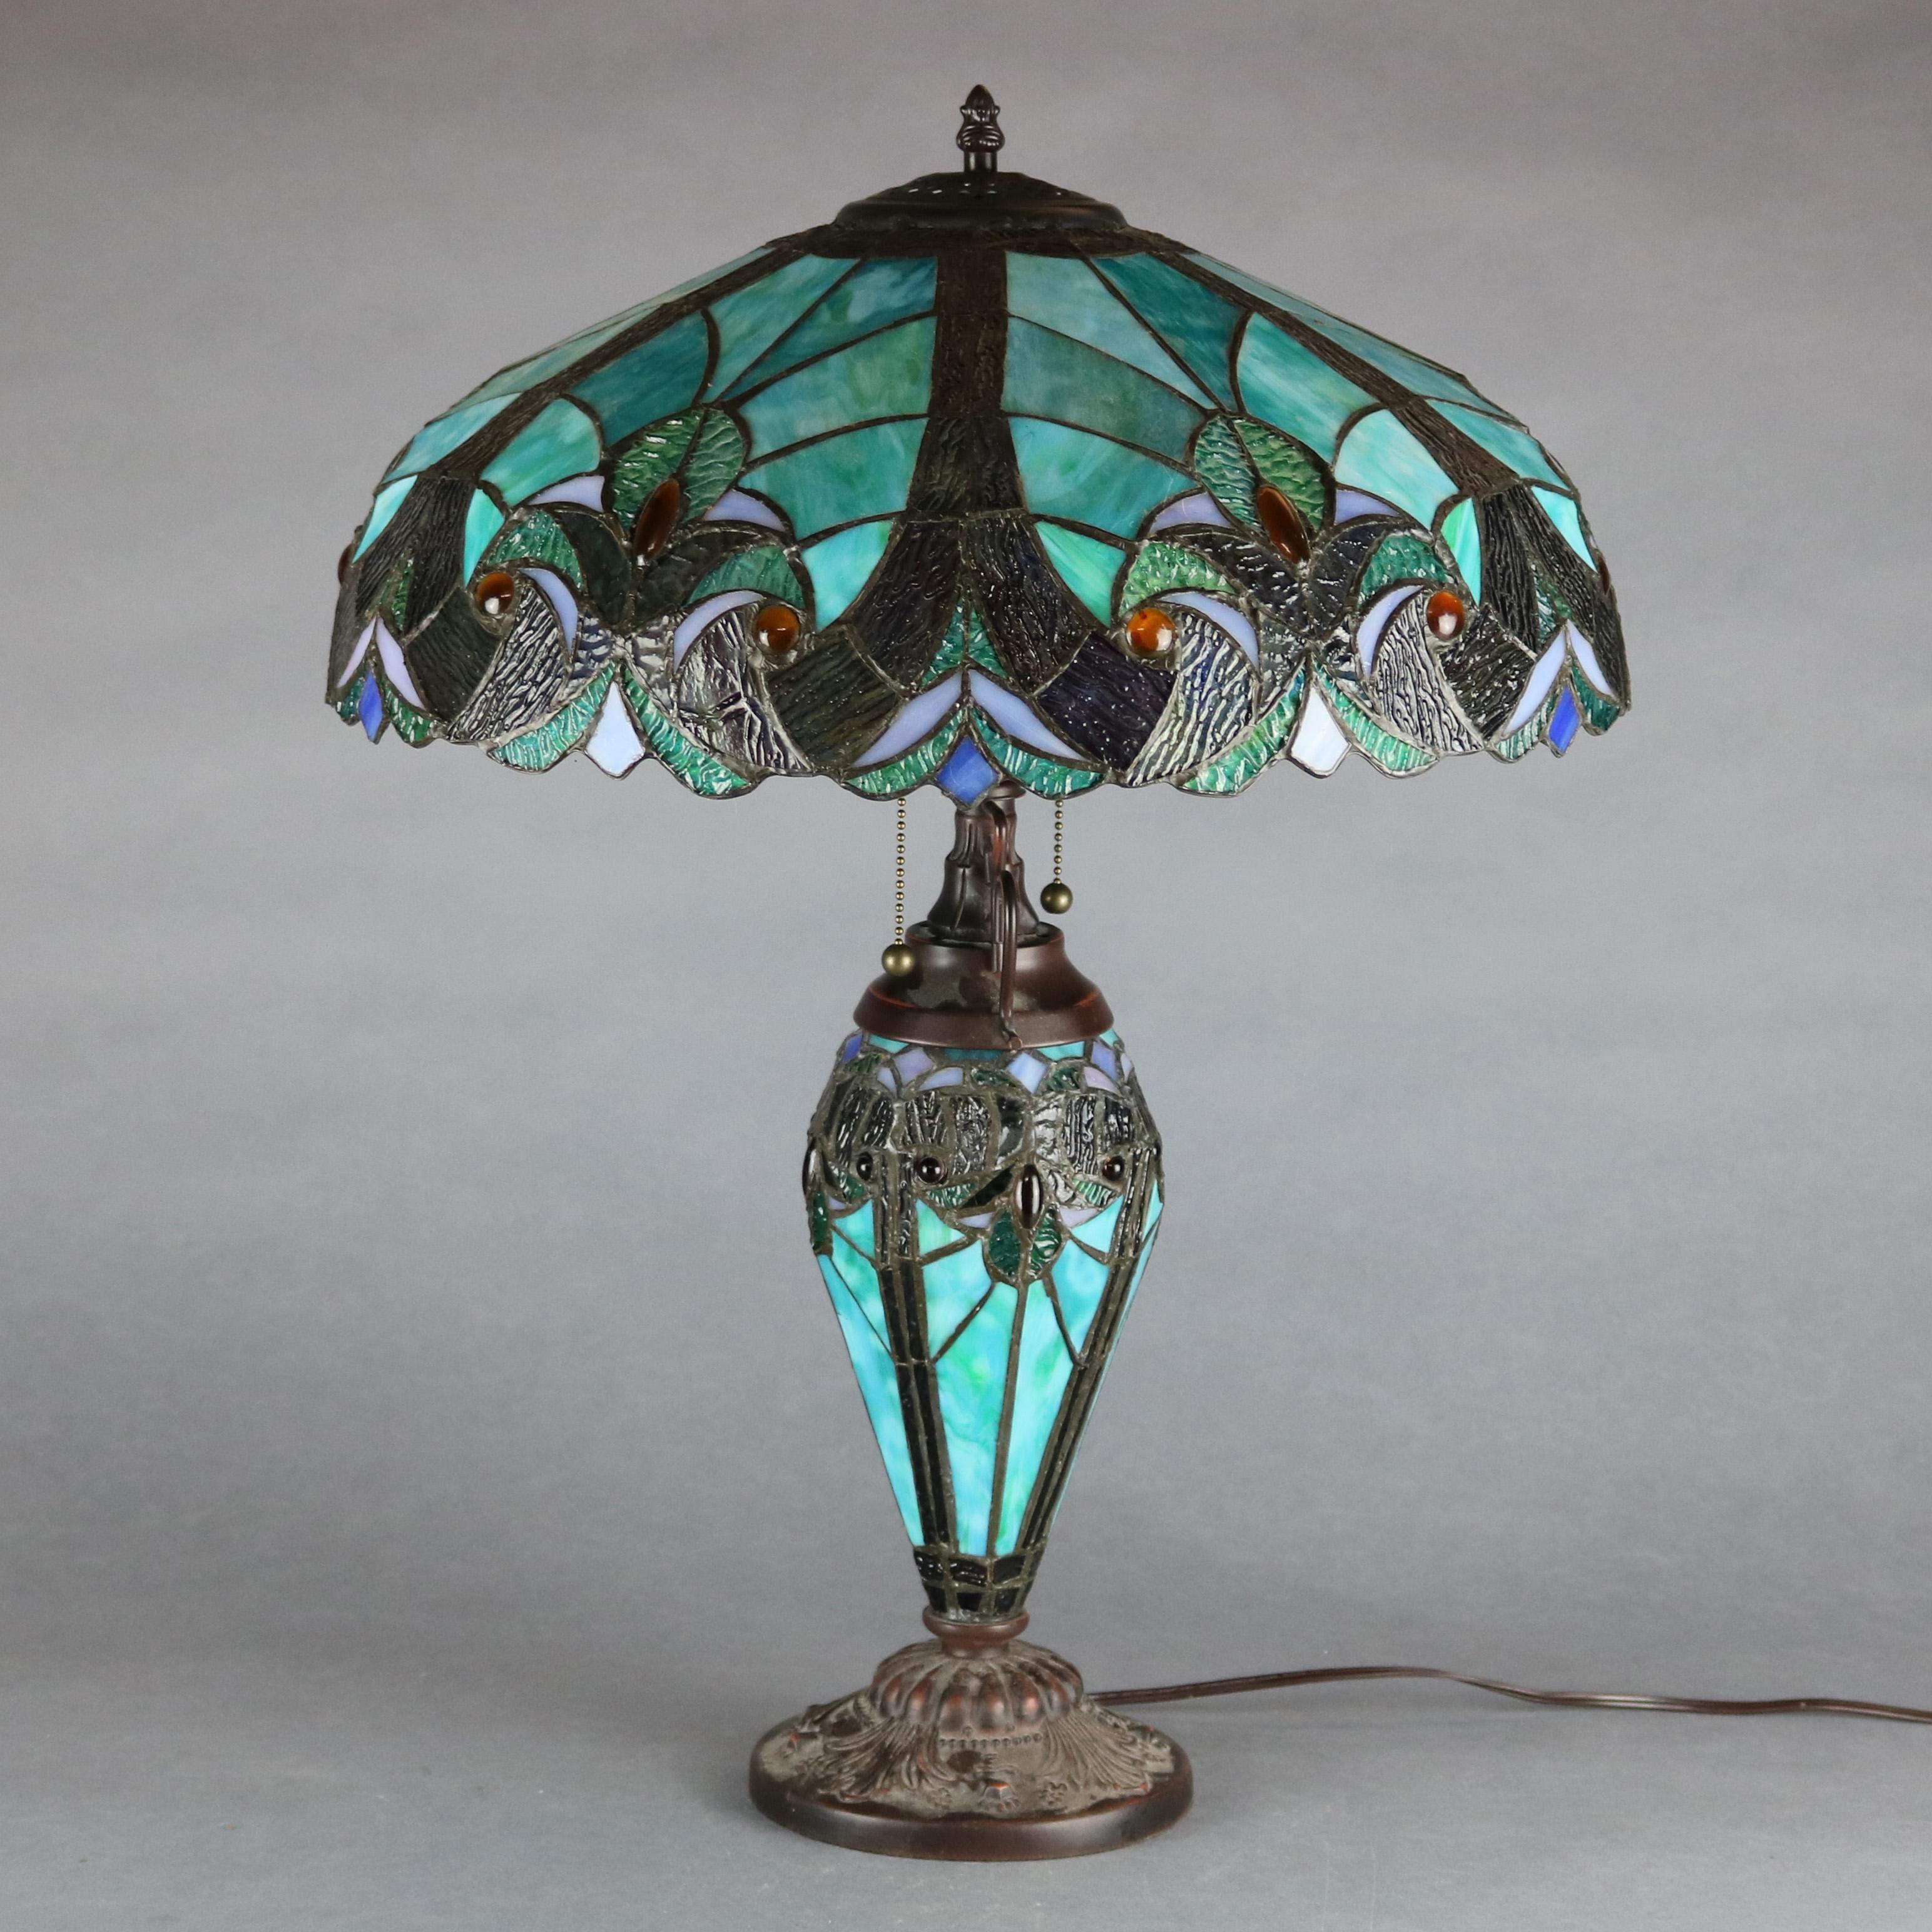 A vintage Arts & Crafts stained glass table lamp in the manner of Tiffany Studios offers mosaic slag and jeweled glass shade in greens and blues with stylized scroll and foliate pattern surmounting matching urn form base having dual independently